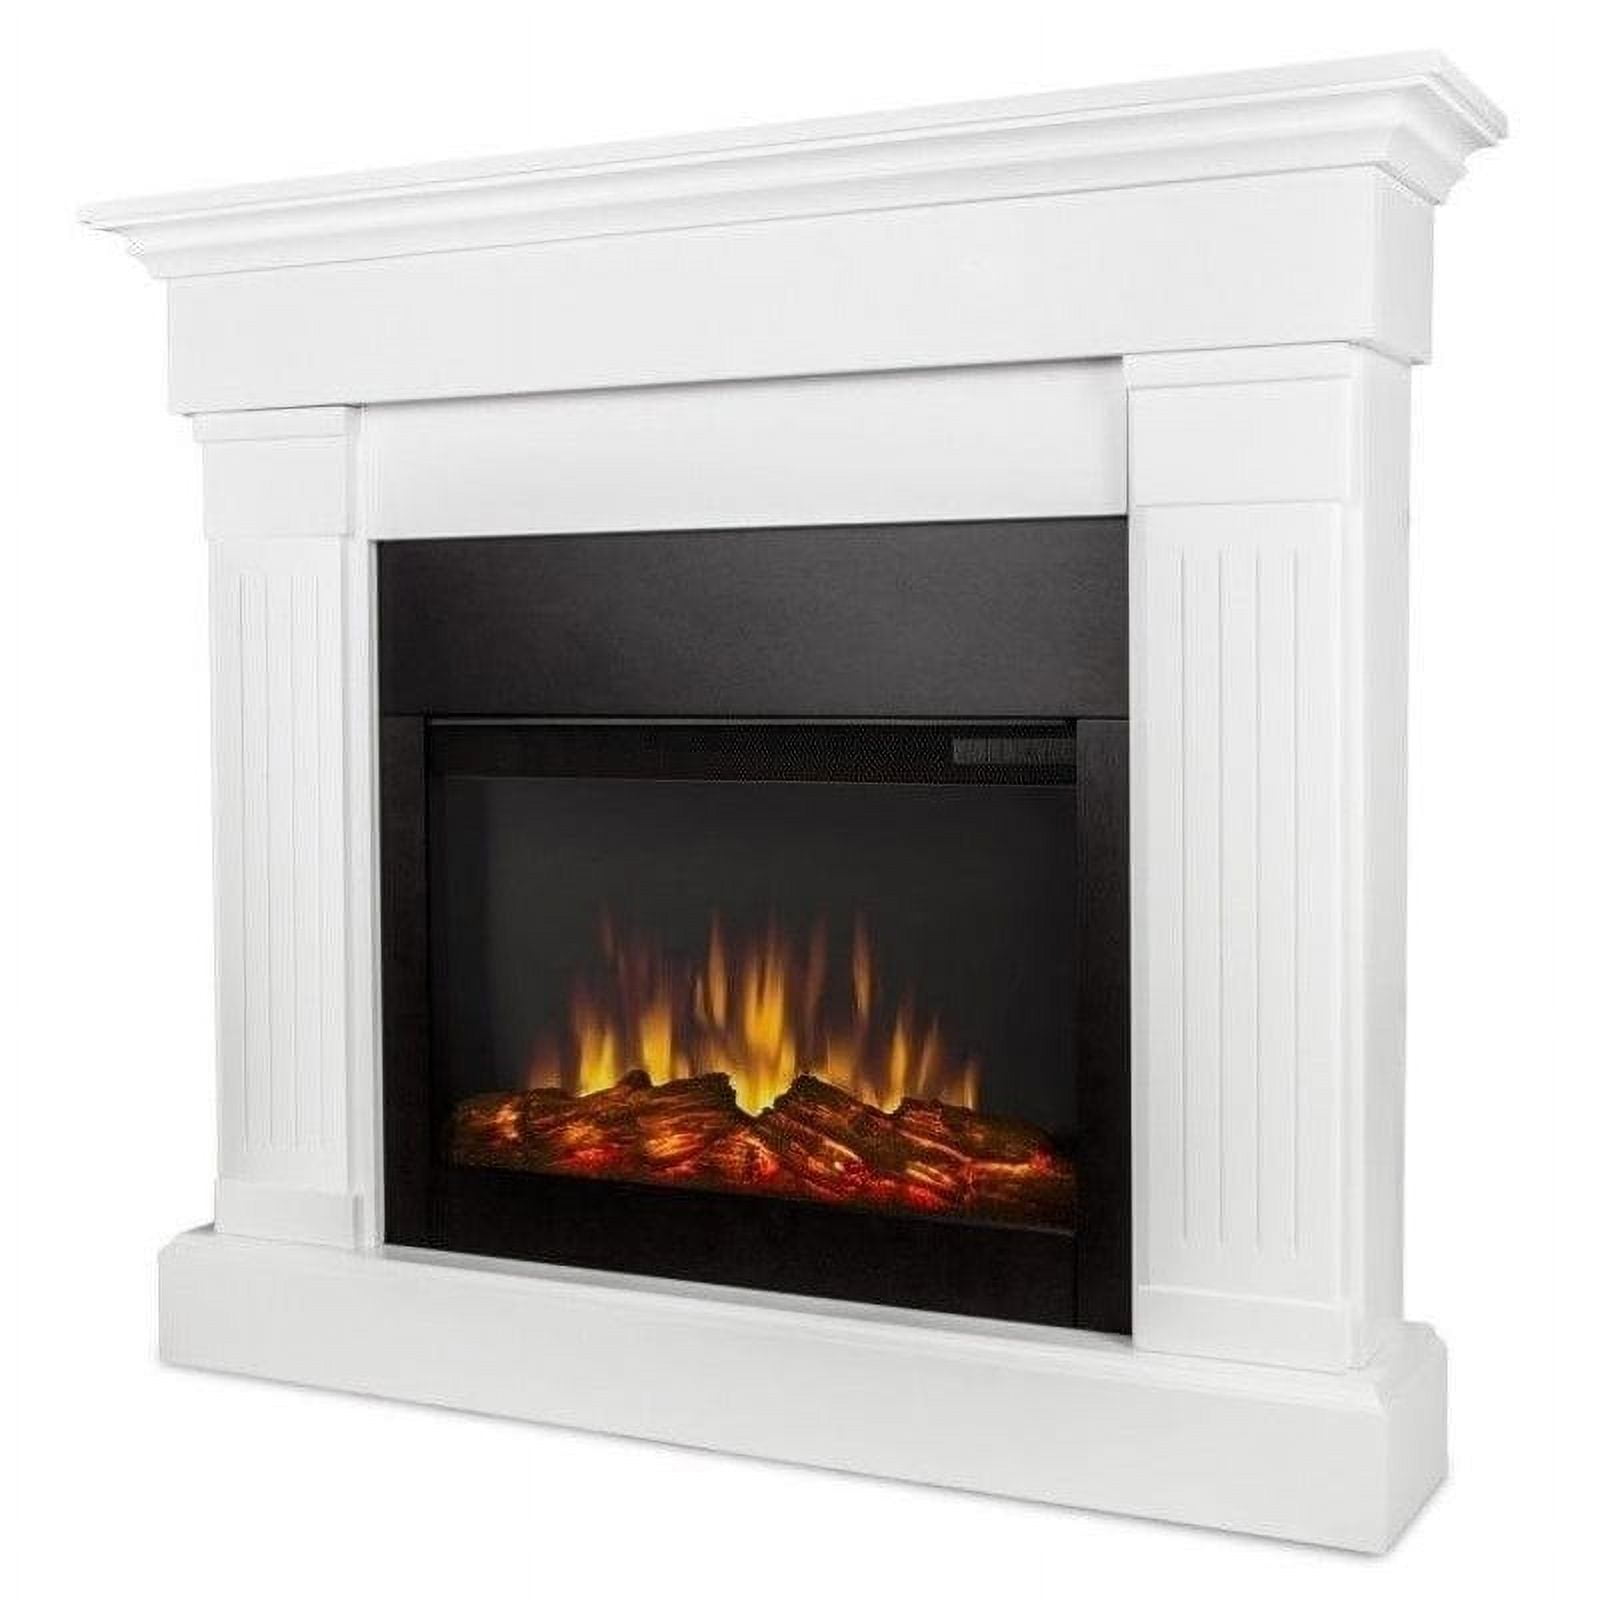 Real Flame Modern Wood Crawford Electric Slim Line Fireplace in